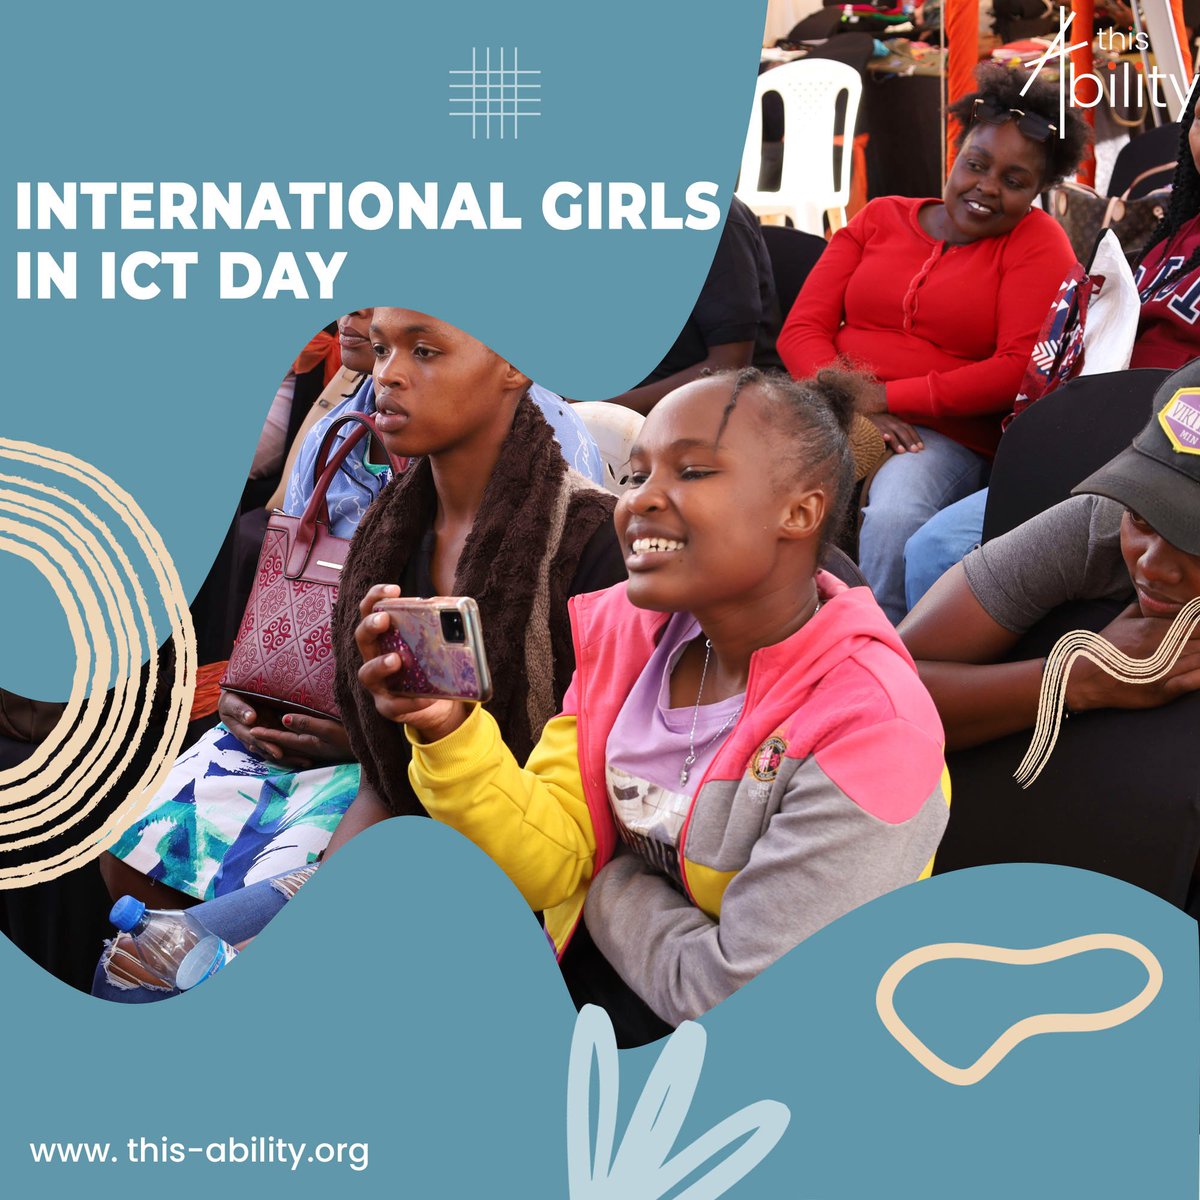 On #InternationalGirlsinICTDay, we're breaking barriers for young #women with #disabilities in #tech. Our eLearning platform, SKILLS, boosts #digitalliteracy. 

To learn more: bit.ly/4d6MkNz

#mamasiri #Hesabika #skills #SRHRplusD #HUUwezo #a11